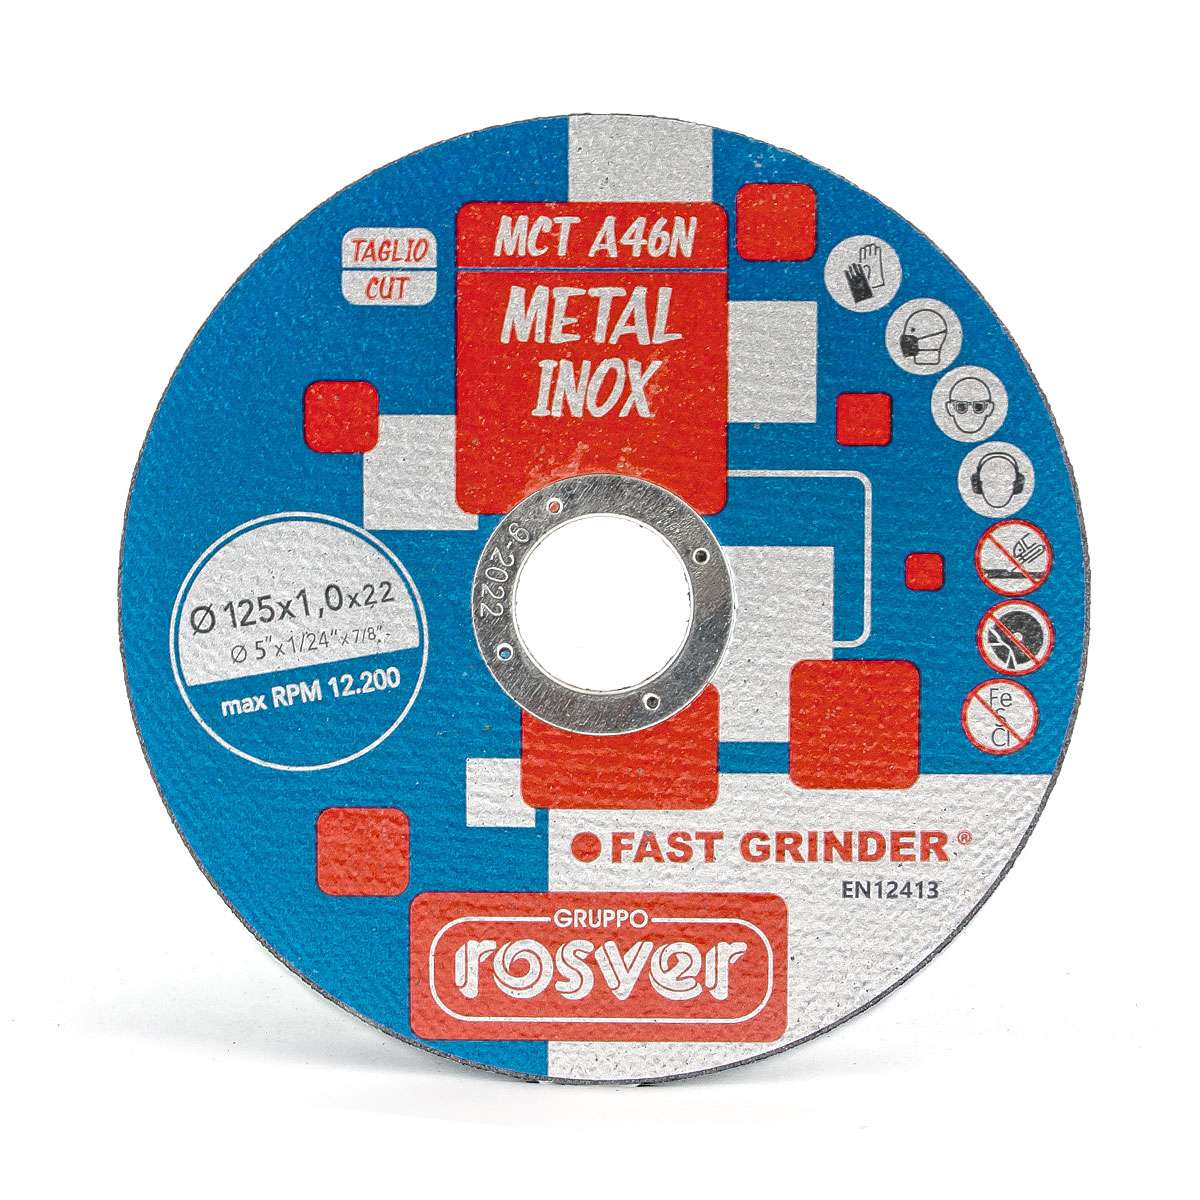 Thin Flat Cutting Discs 115x1x22 A46N for stainless steel Rosver